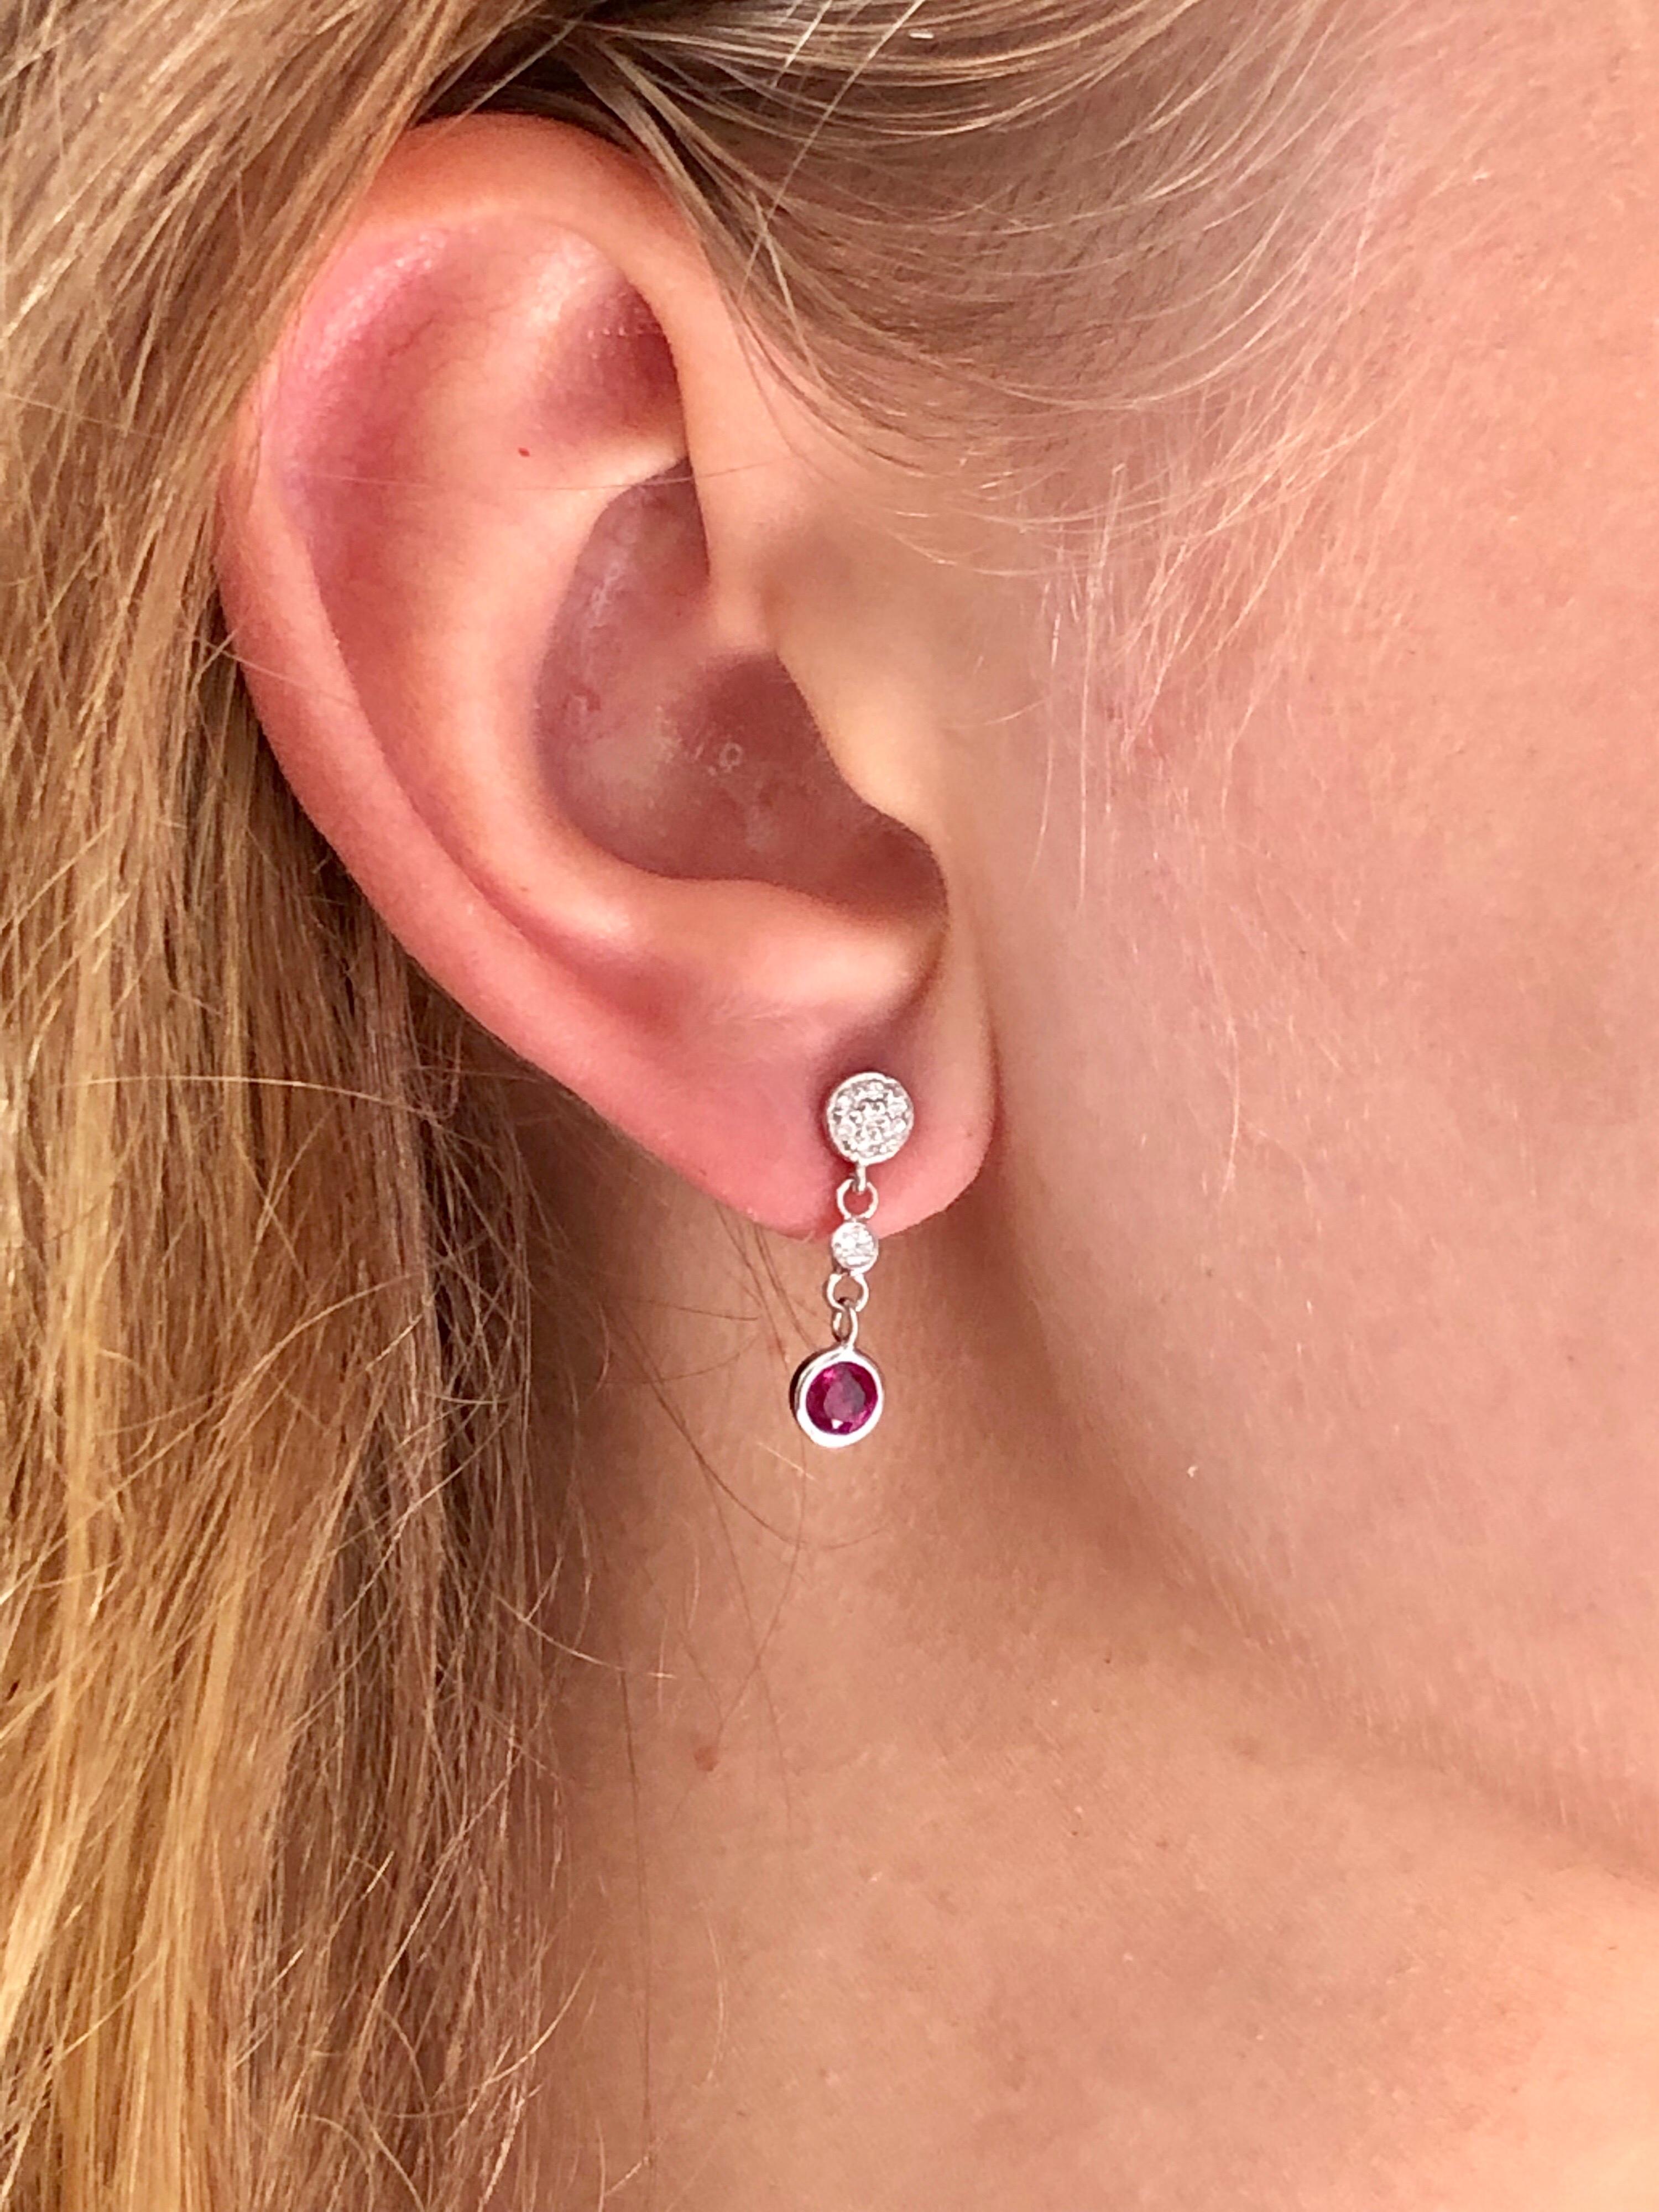 Women's Diamond and Round Ruby Drop Earrings Weighing 1.38 Carat